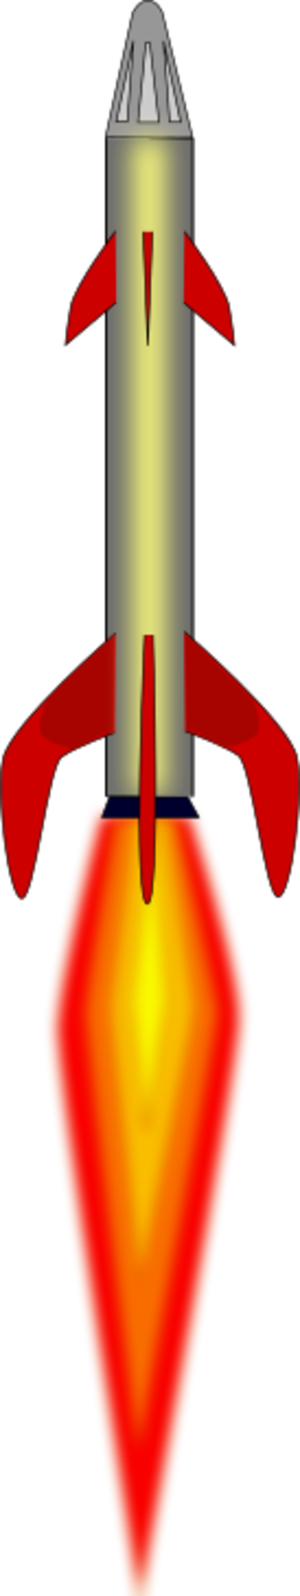 clip art svg openclipart color flying engine science fiction space rocket missile flight cipart scifi space craft takeoff sci-fi launch full power 剪贴画 颜色 飞行